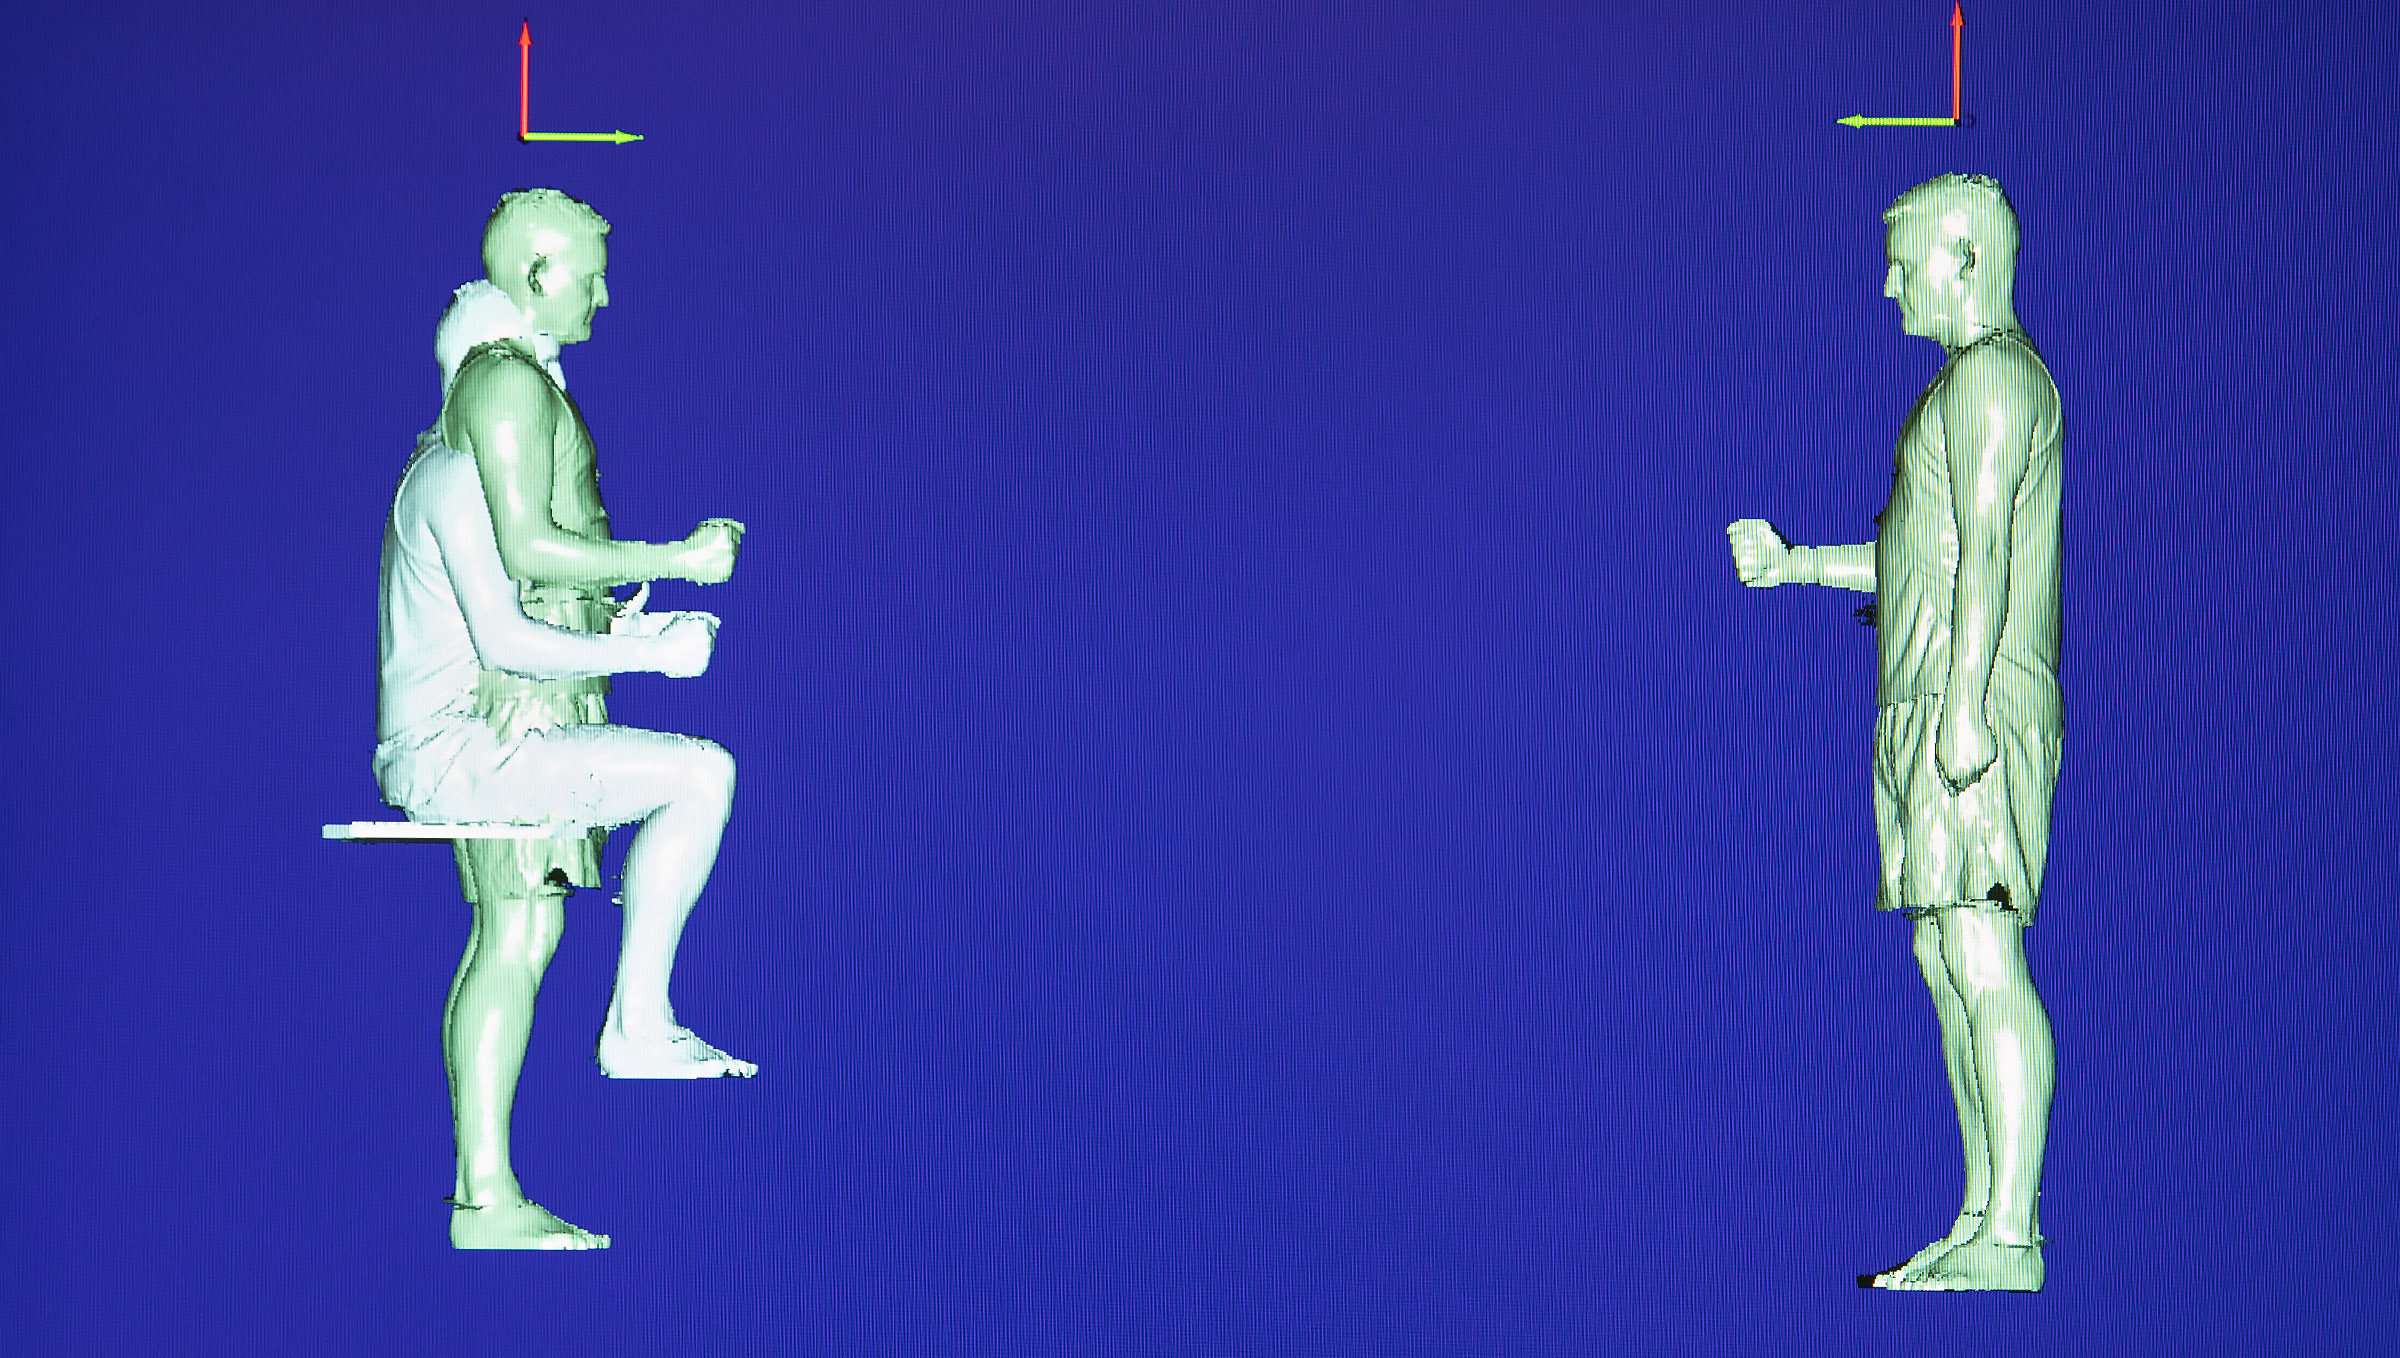 Image shows the human body on a digital screen, in seated and standing positions.